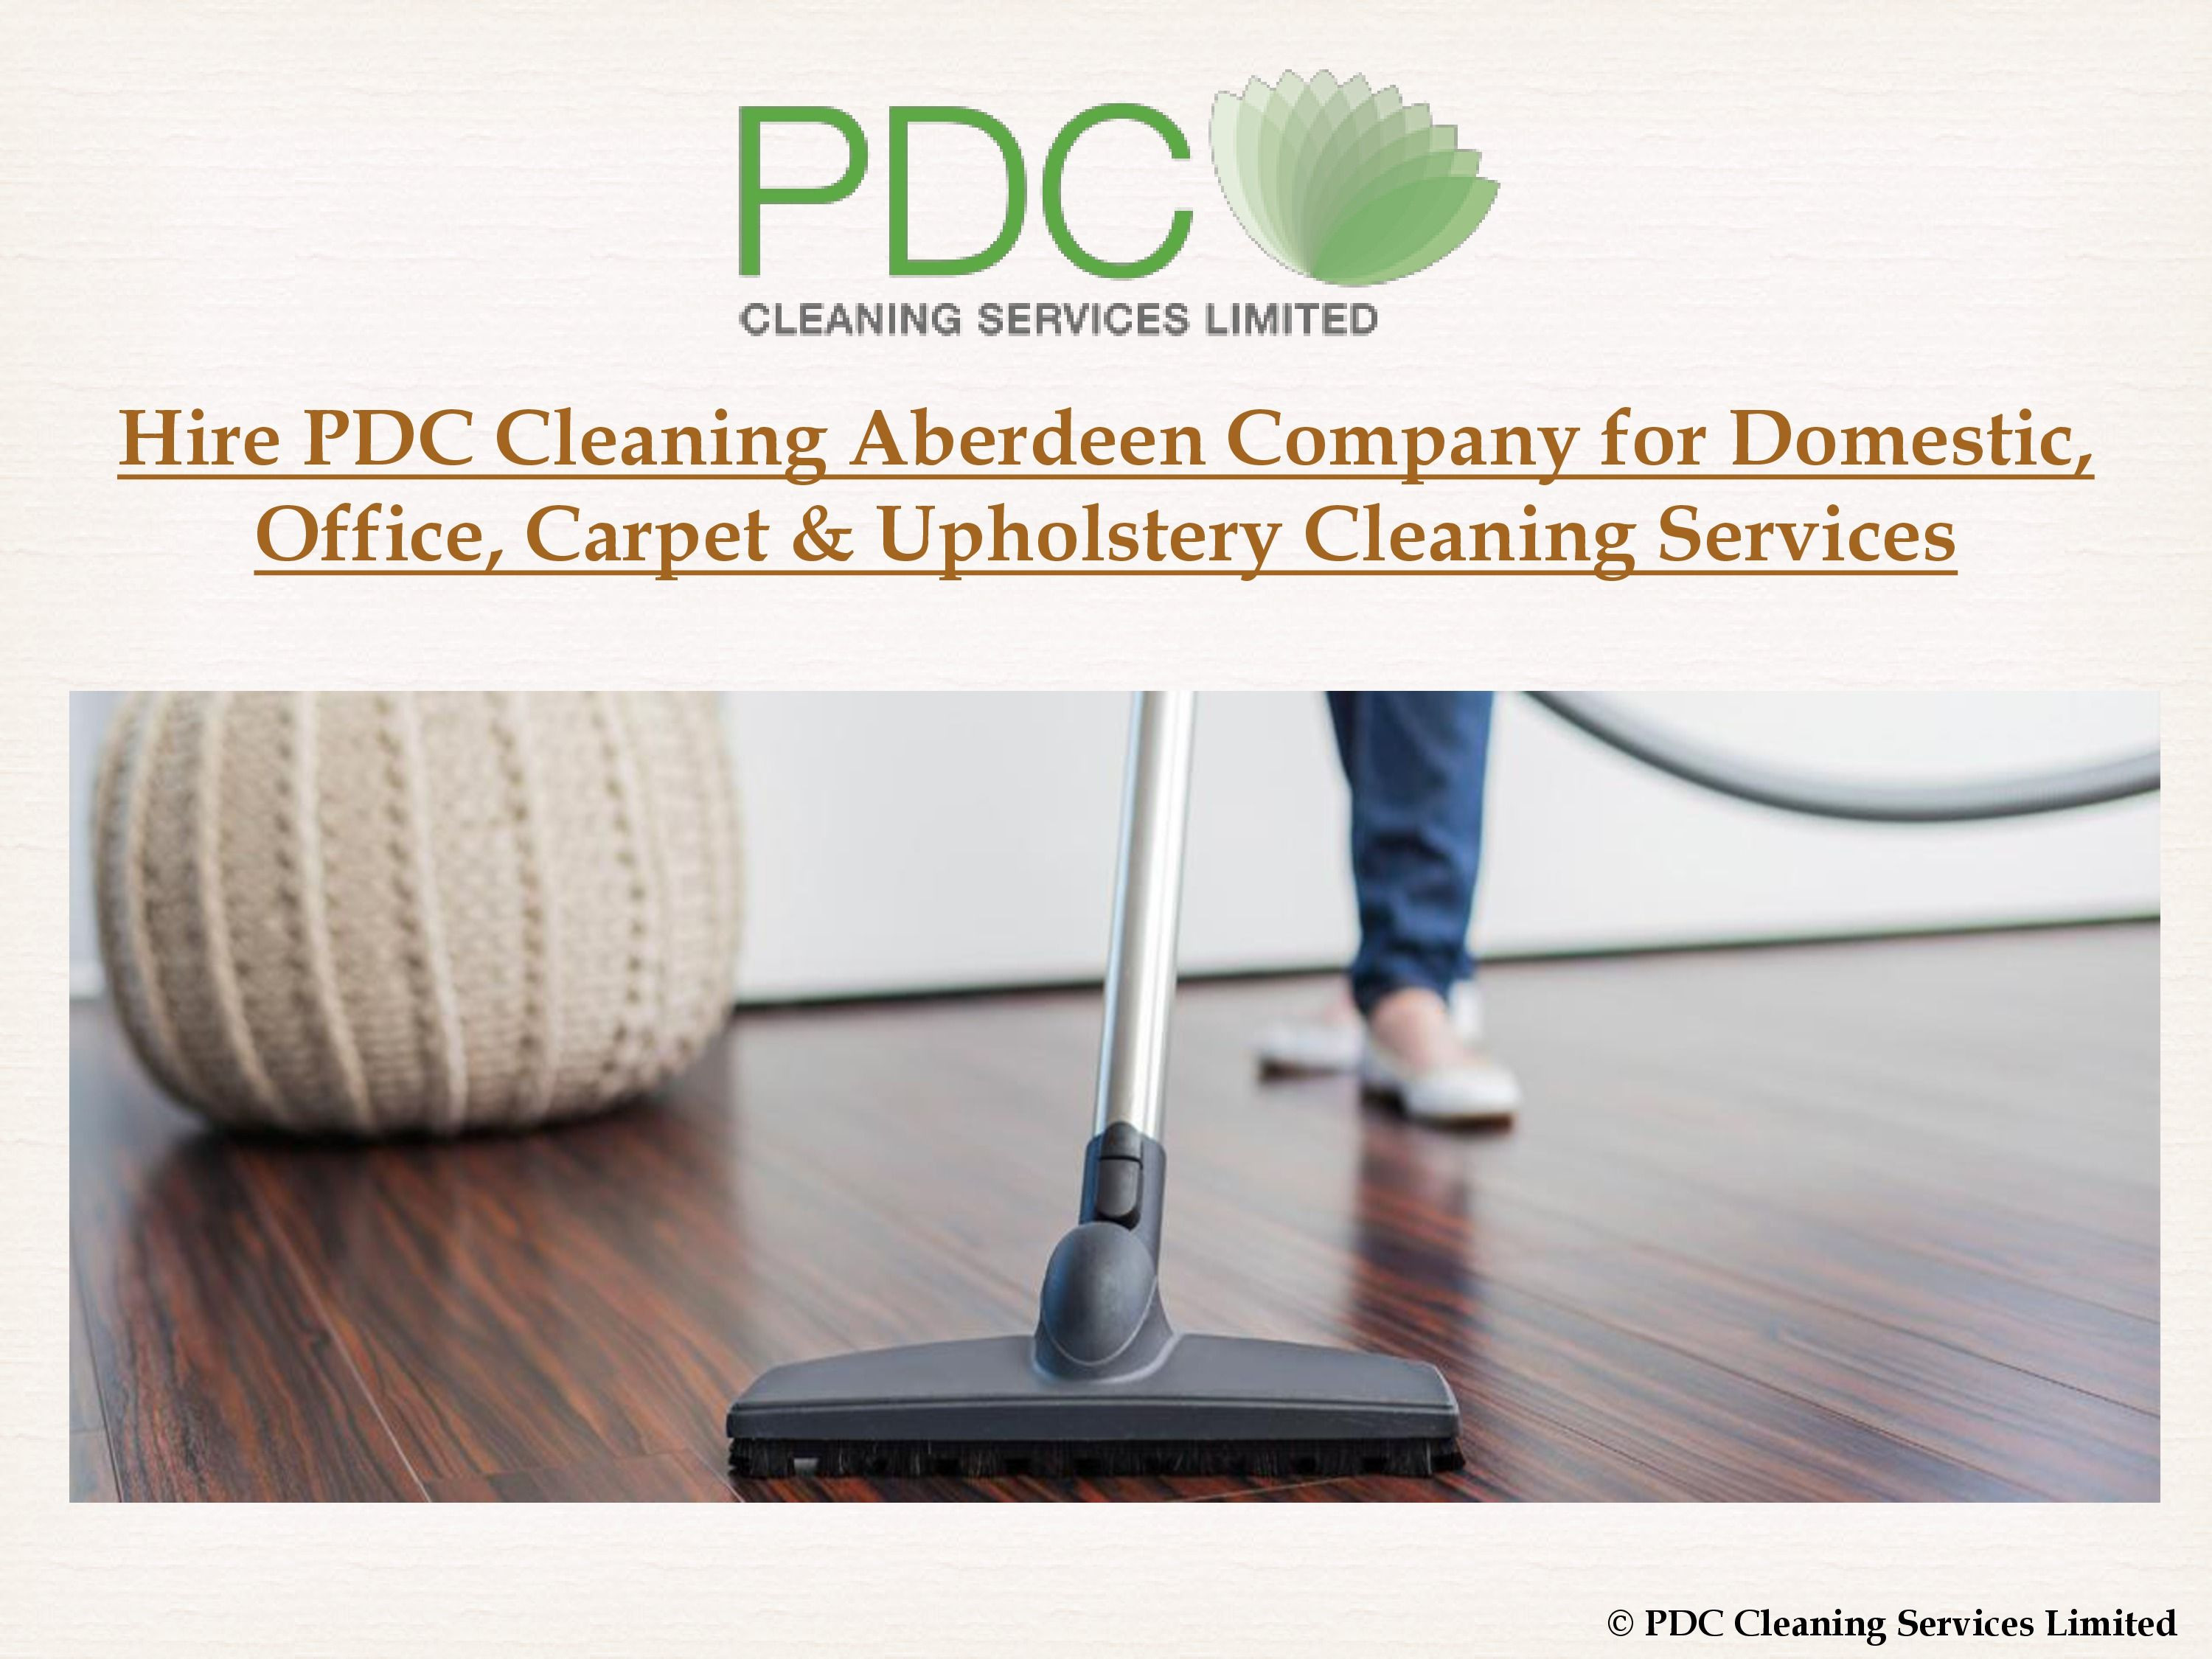 14 Great top Vacuums for Hardwood Floors 2023 free download top vacuums for hardwood floors of cheap and best cleaning services in aberdeen united kingdom are you with best professional home cleaning services offers carpet cleaning upholstery cleanin